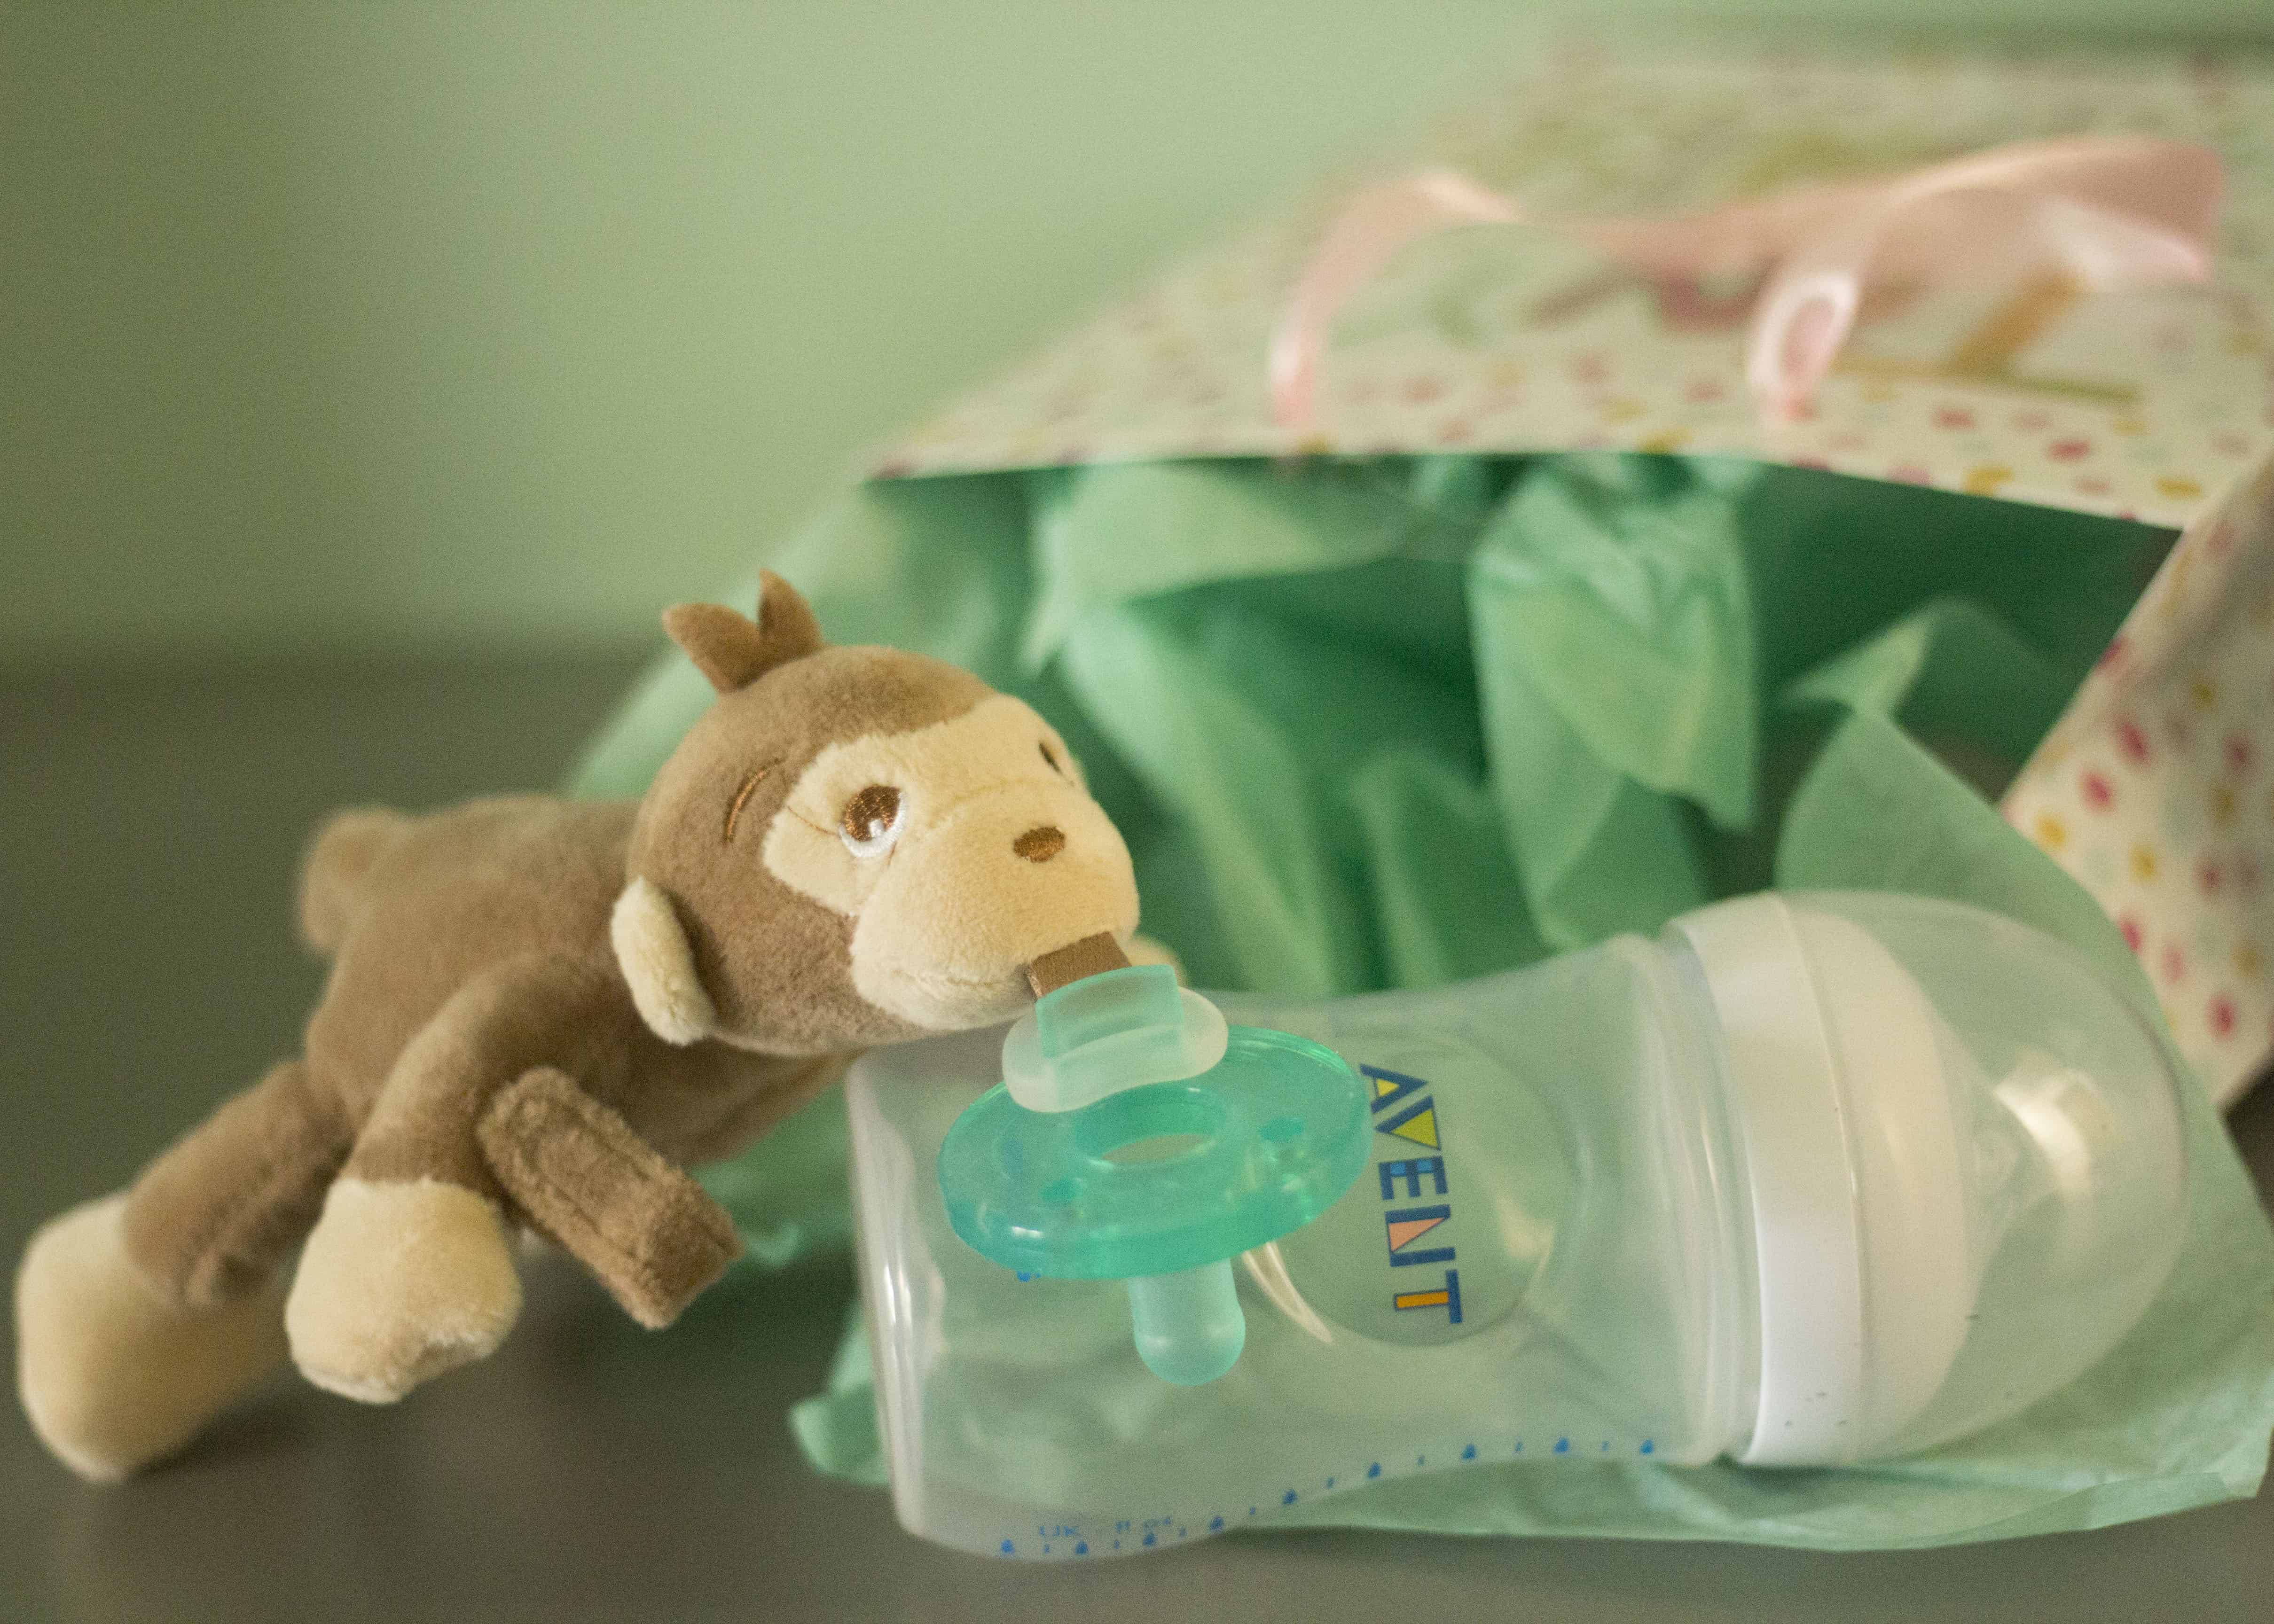 PHILIPS AVENT BOTTLE AND SOOTHIE